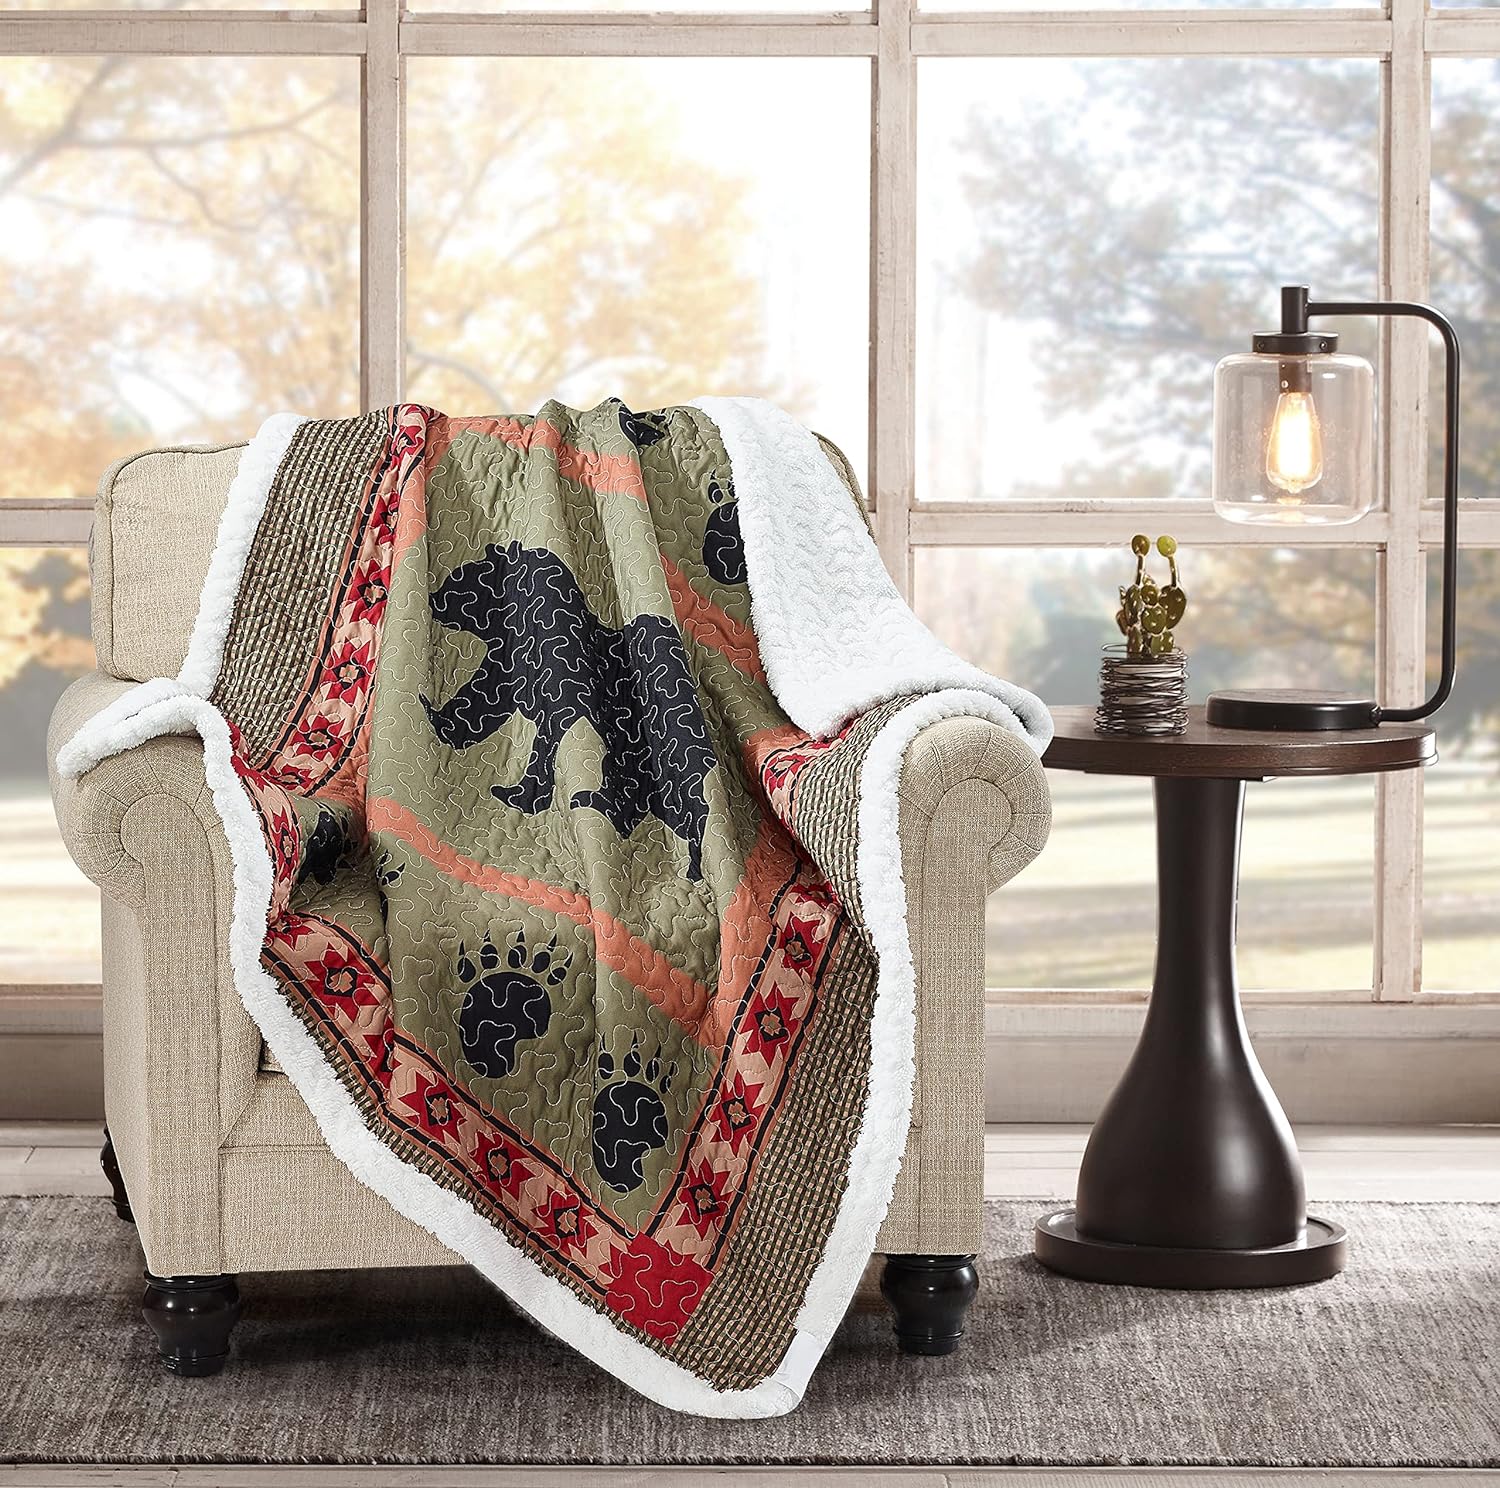 Virah Bella Sherpa blankets are made of high-quality Sherpa materials, soft and skin friendly, warm and comfortable. It is the perfect companion for your home life.